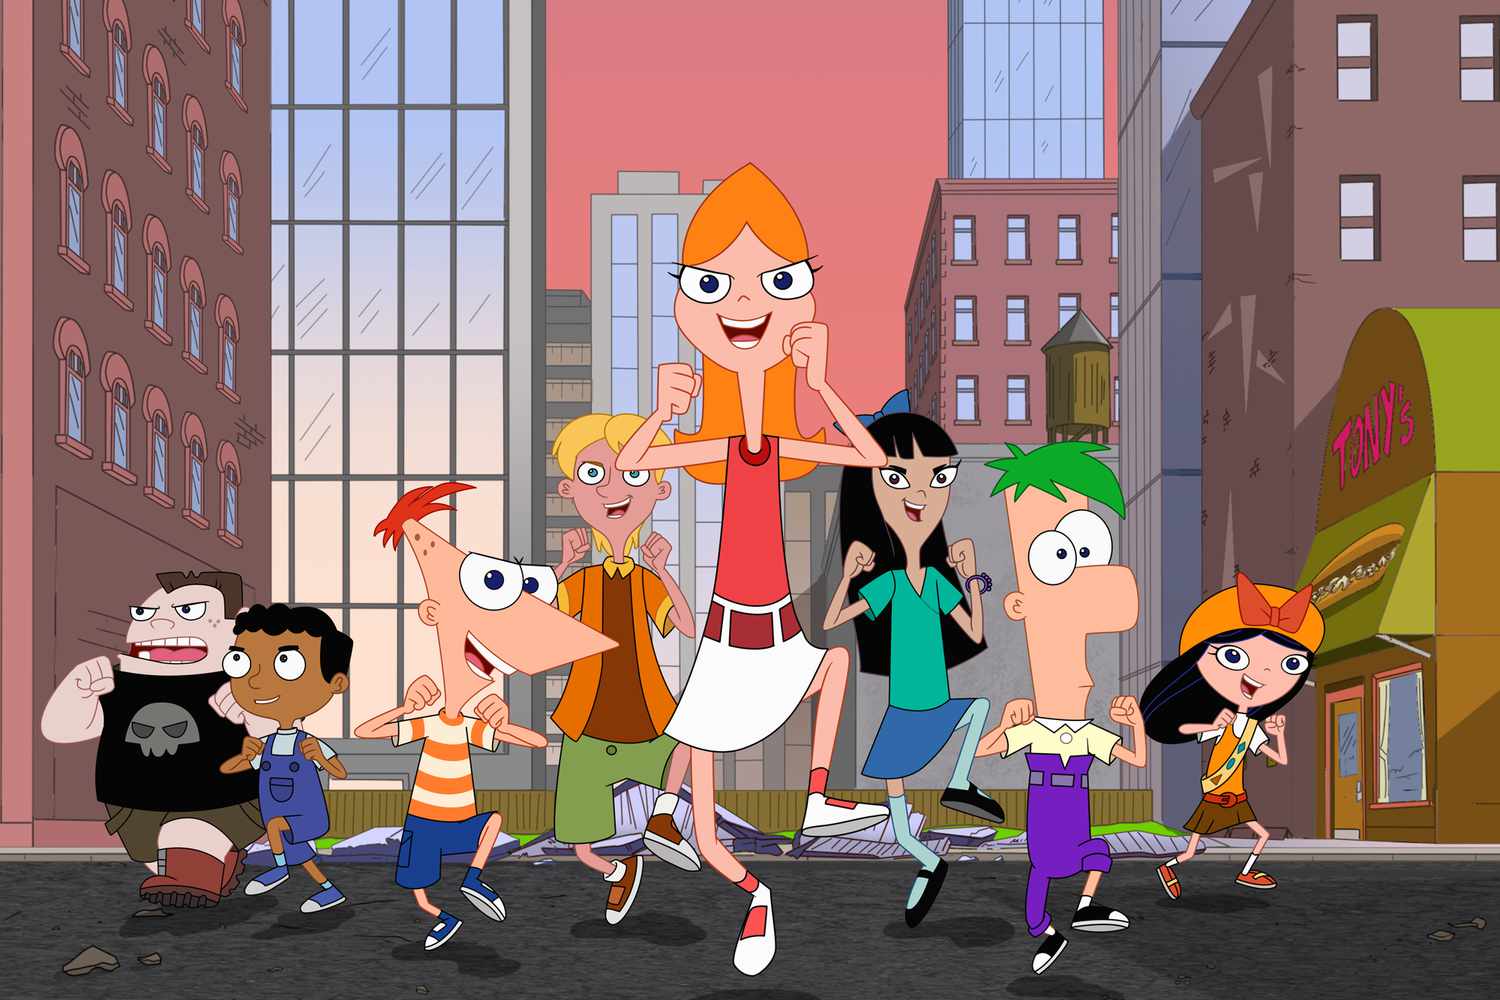 PHINEAS AND FERB THE MOVIE: CANDACE AGAINST THE UNIVERSE